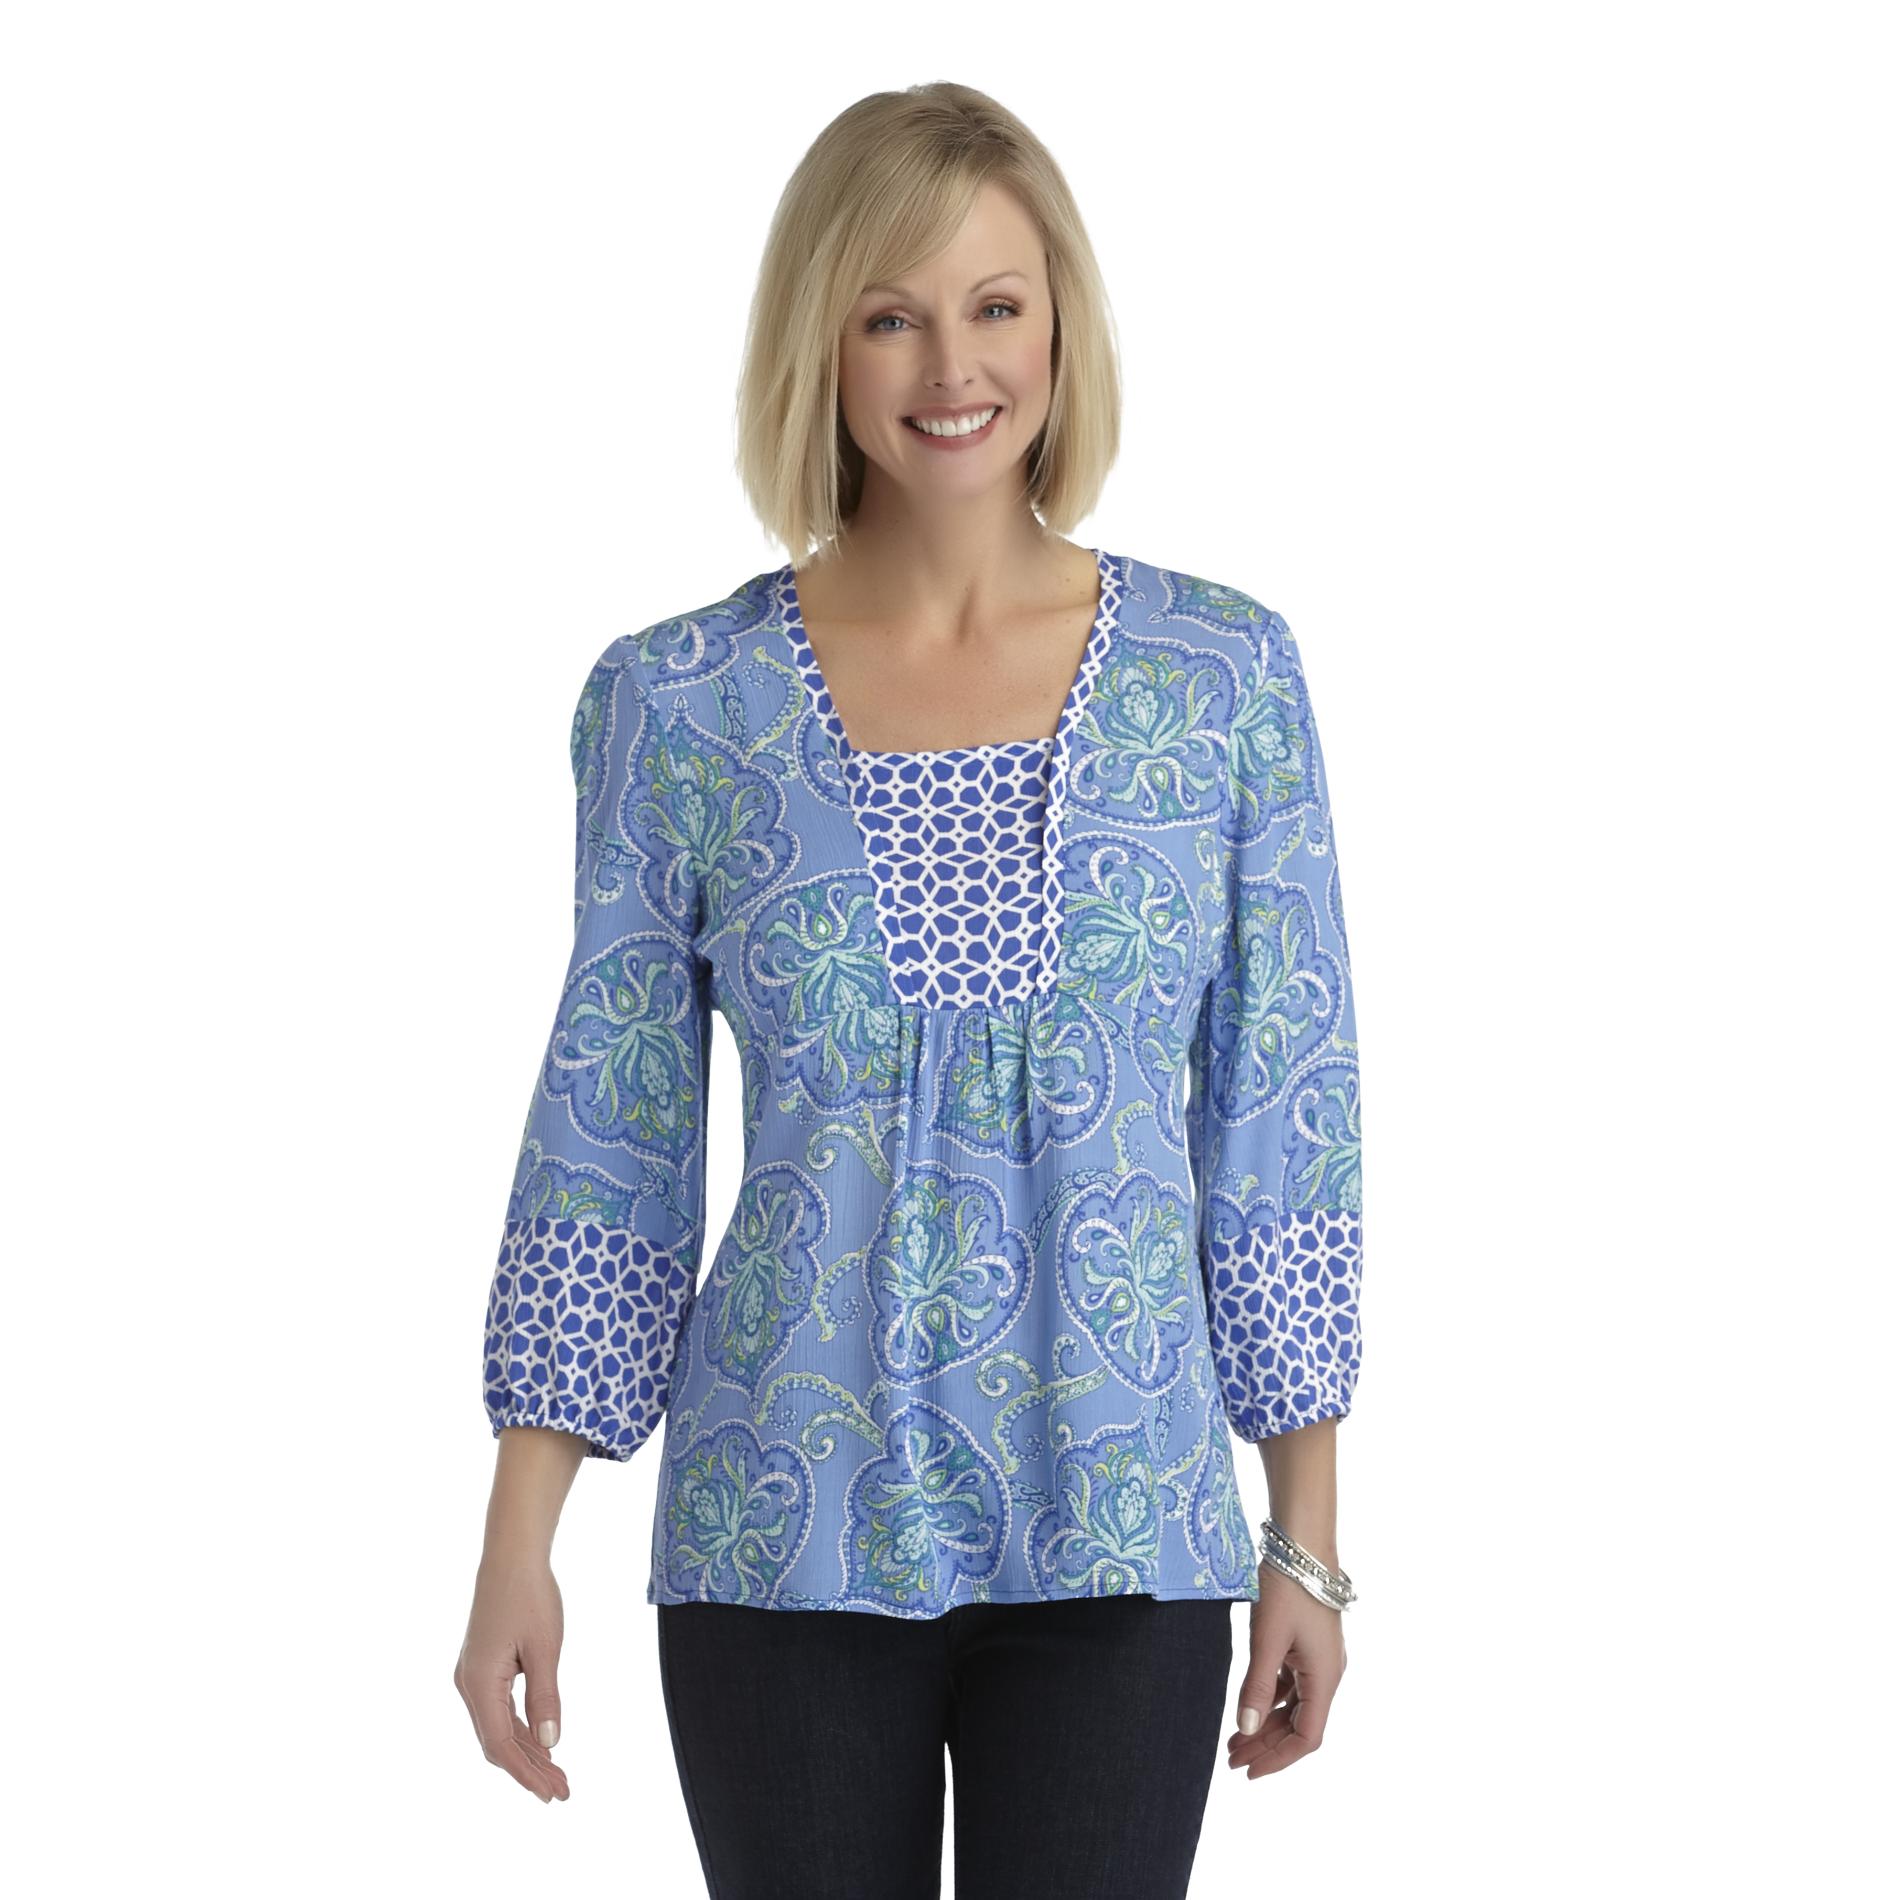 Jaclyn Smith Women's Peasant Tunic Blouse - Paisley